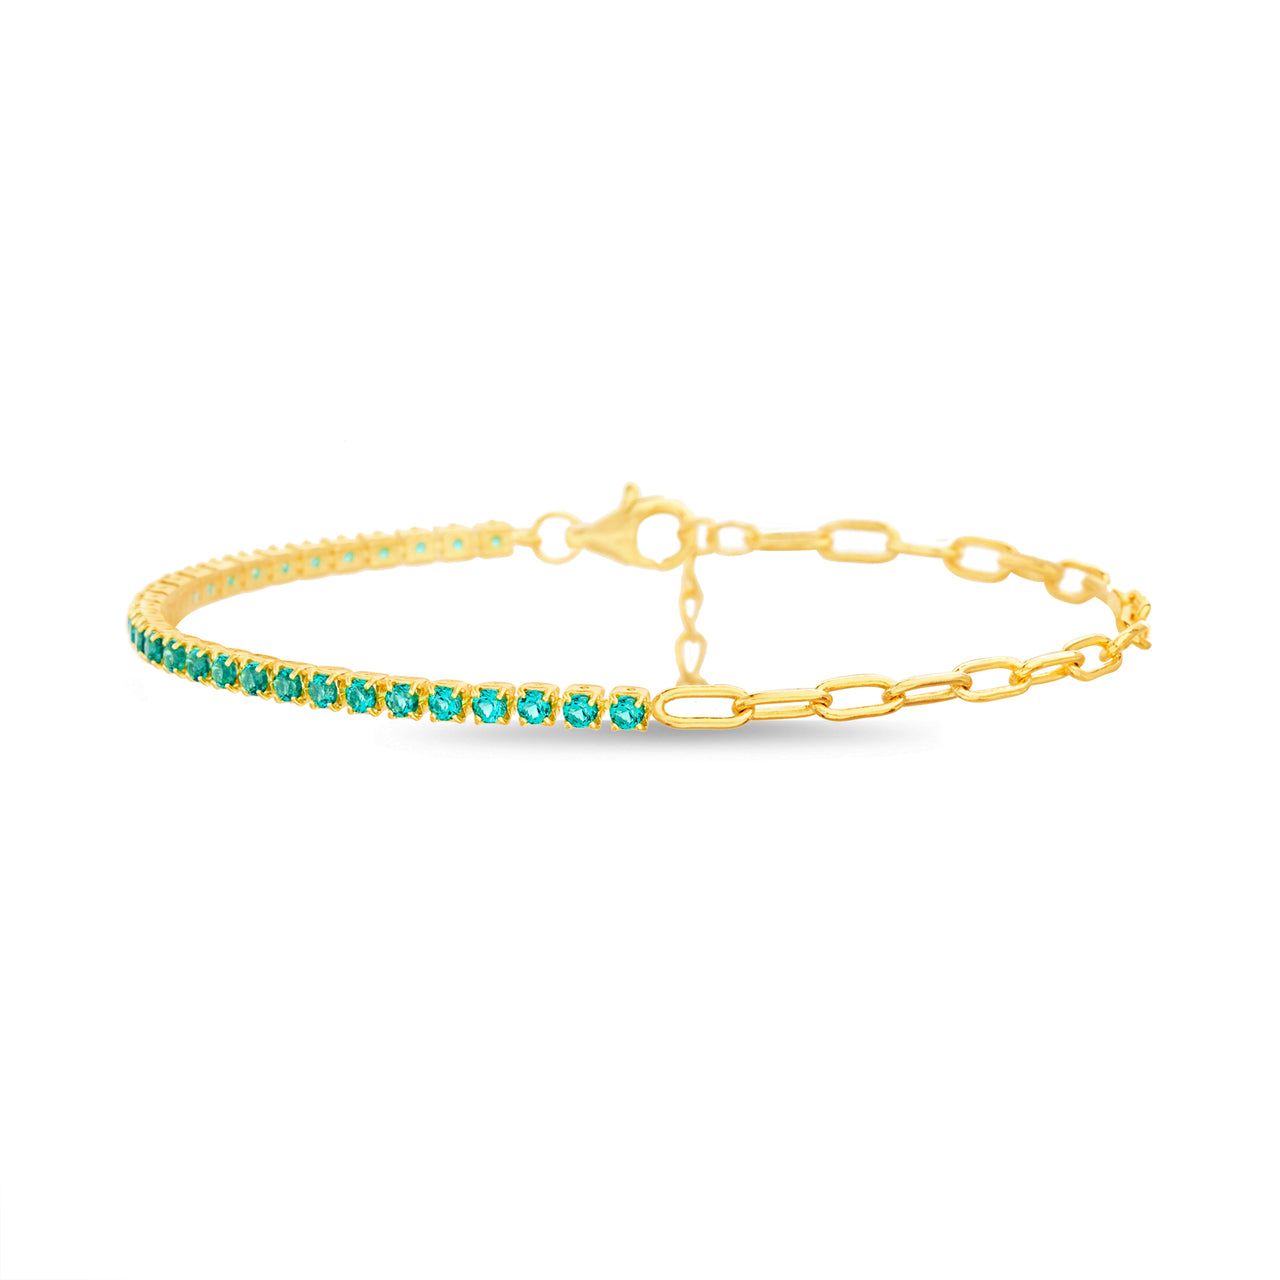 Lesa Michele Various Colors Cubic Zirconia Half Paperclip Chain Bracelet in Yellow Gold Plated Sterling Silver